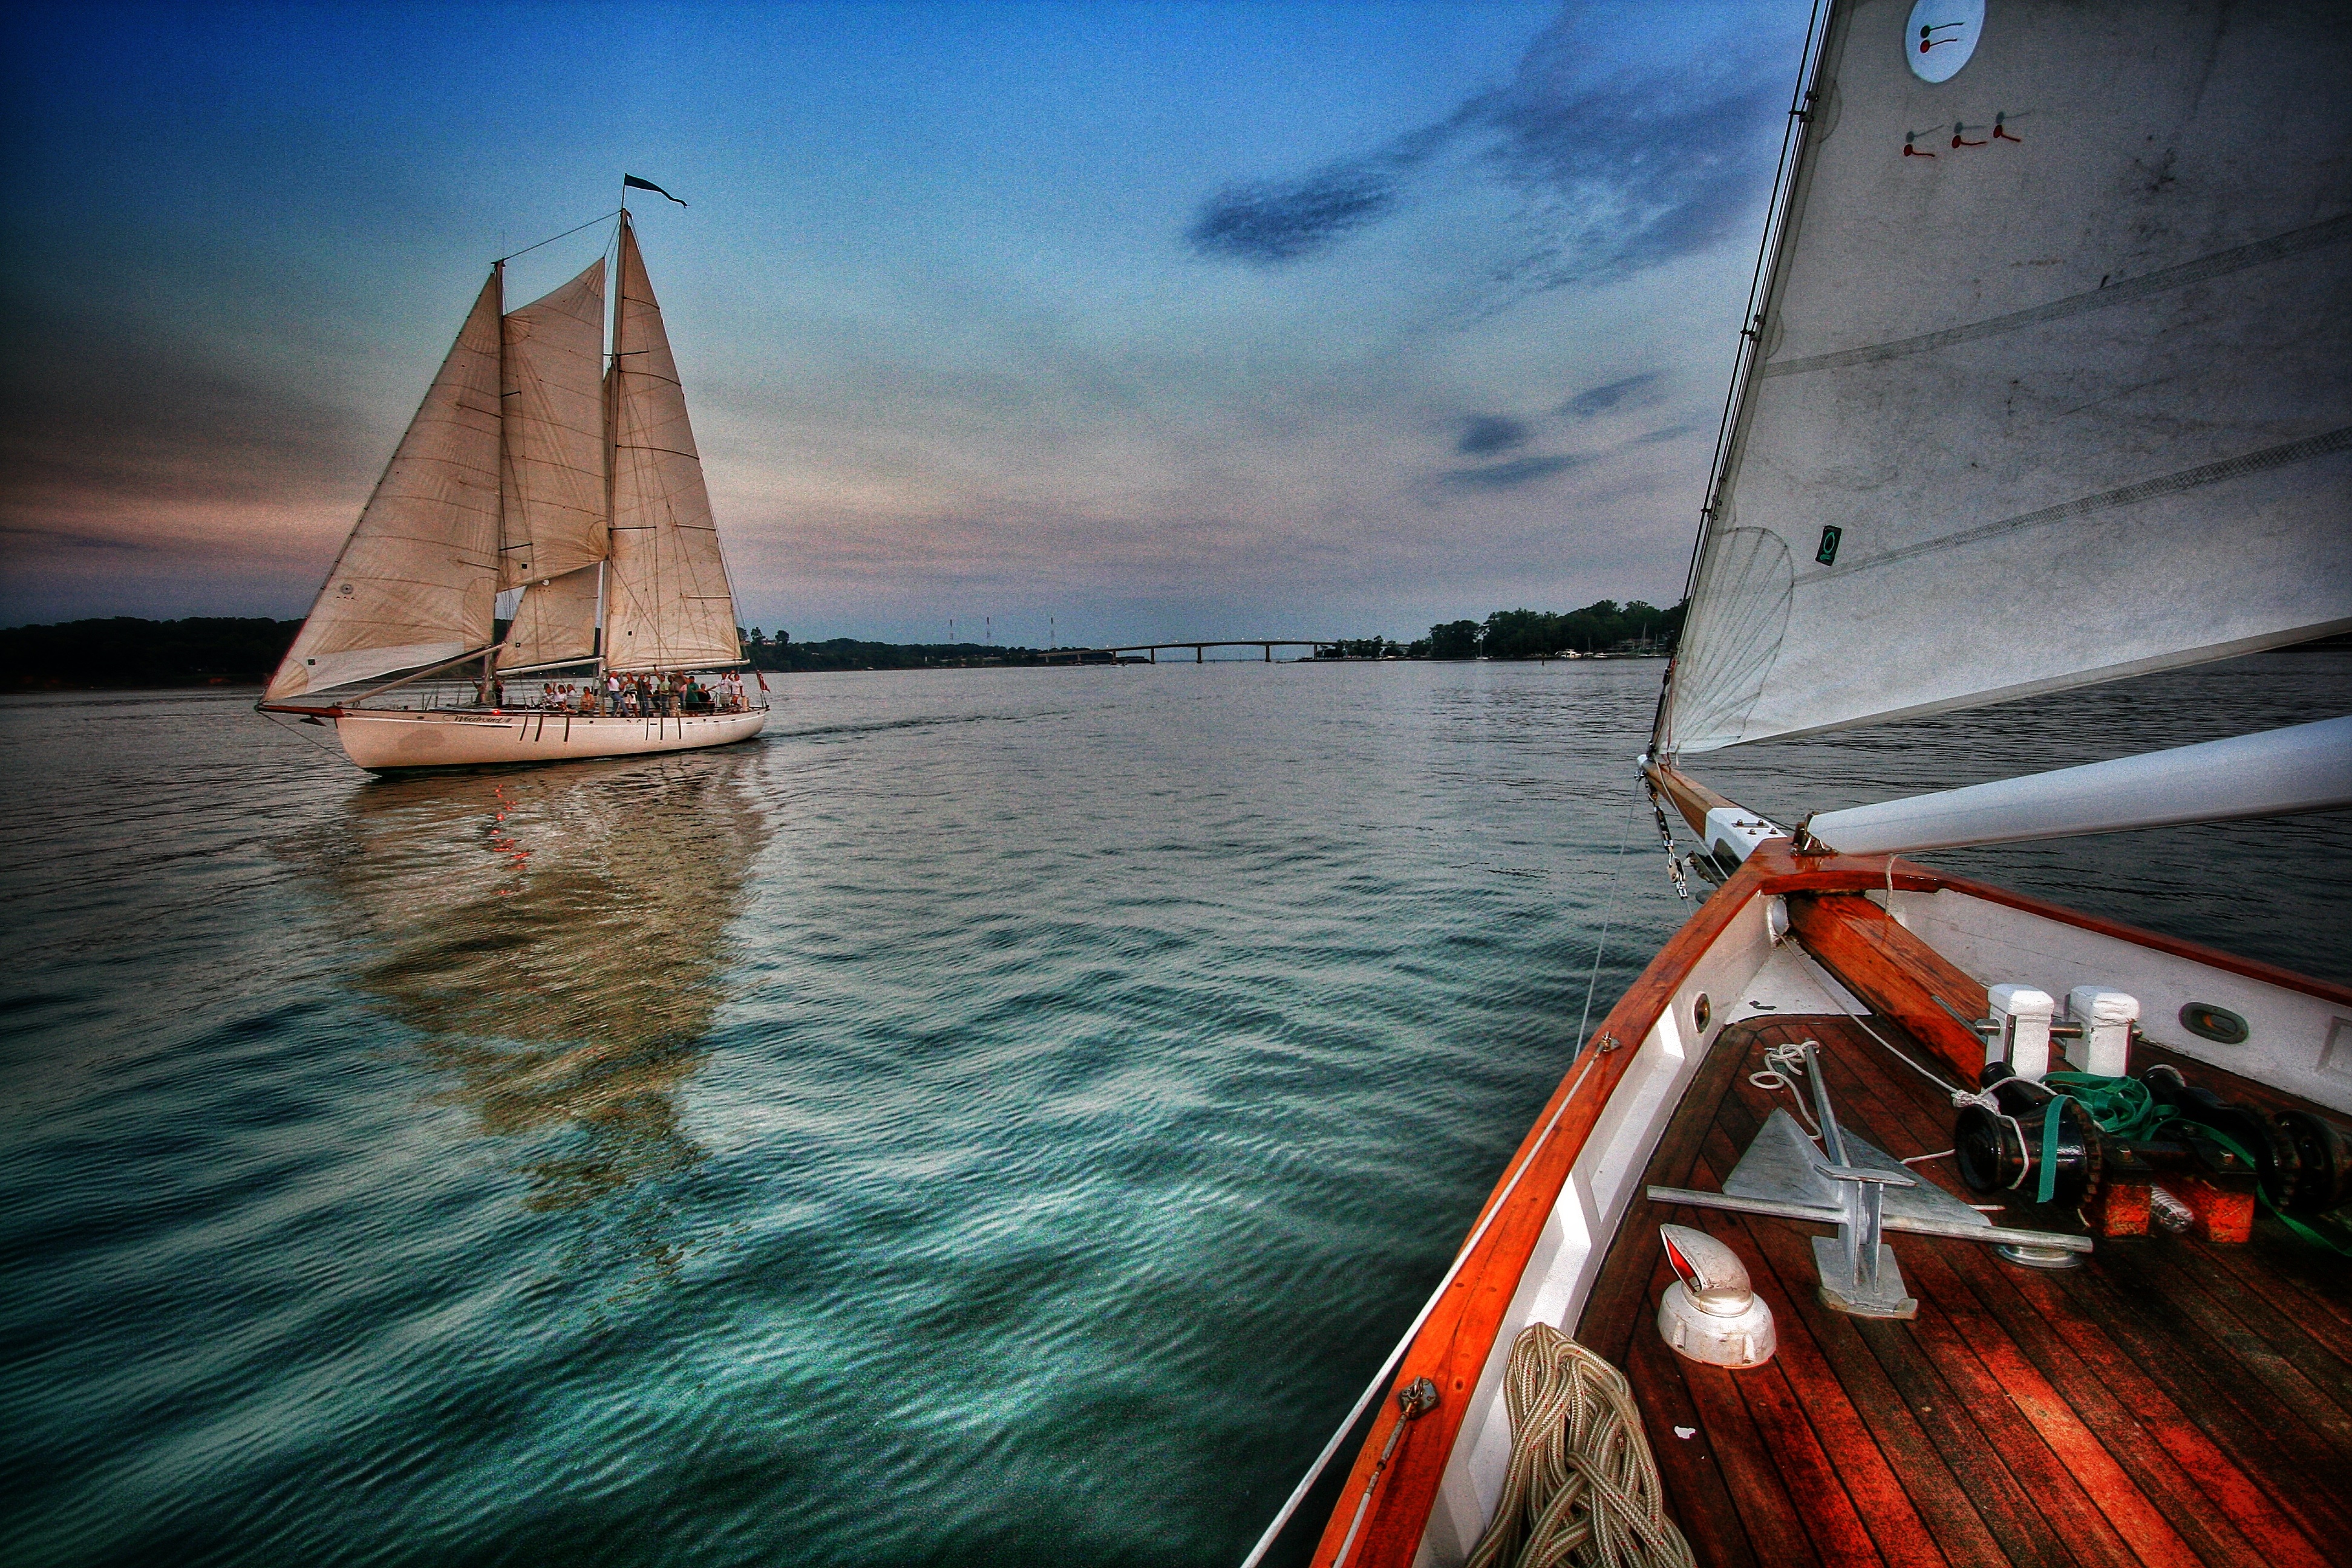 Rippled green waters and sunset sky with both schooners